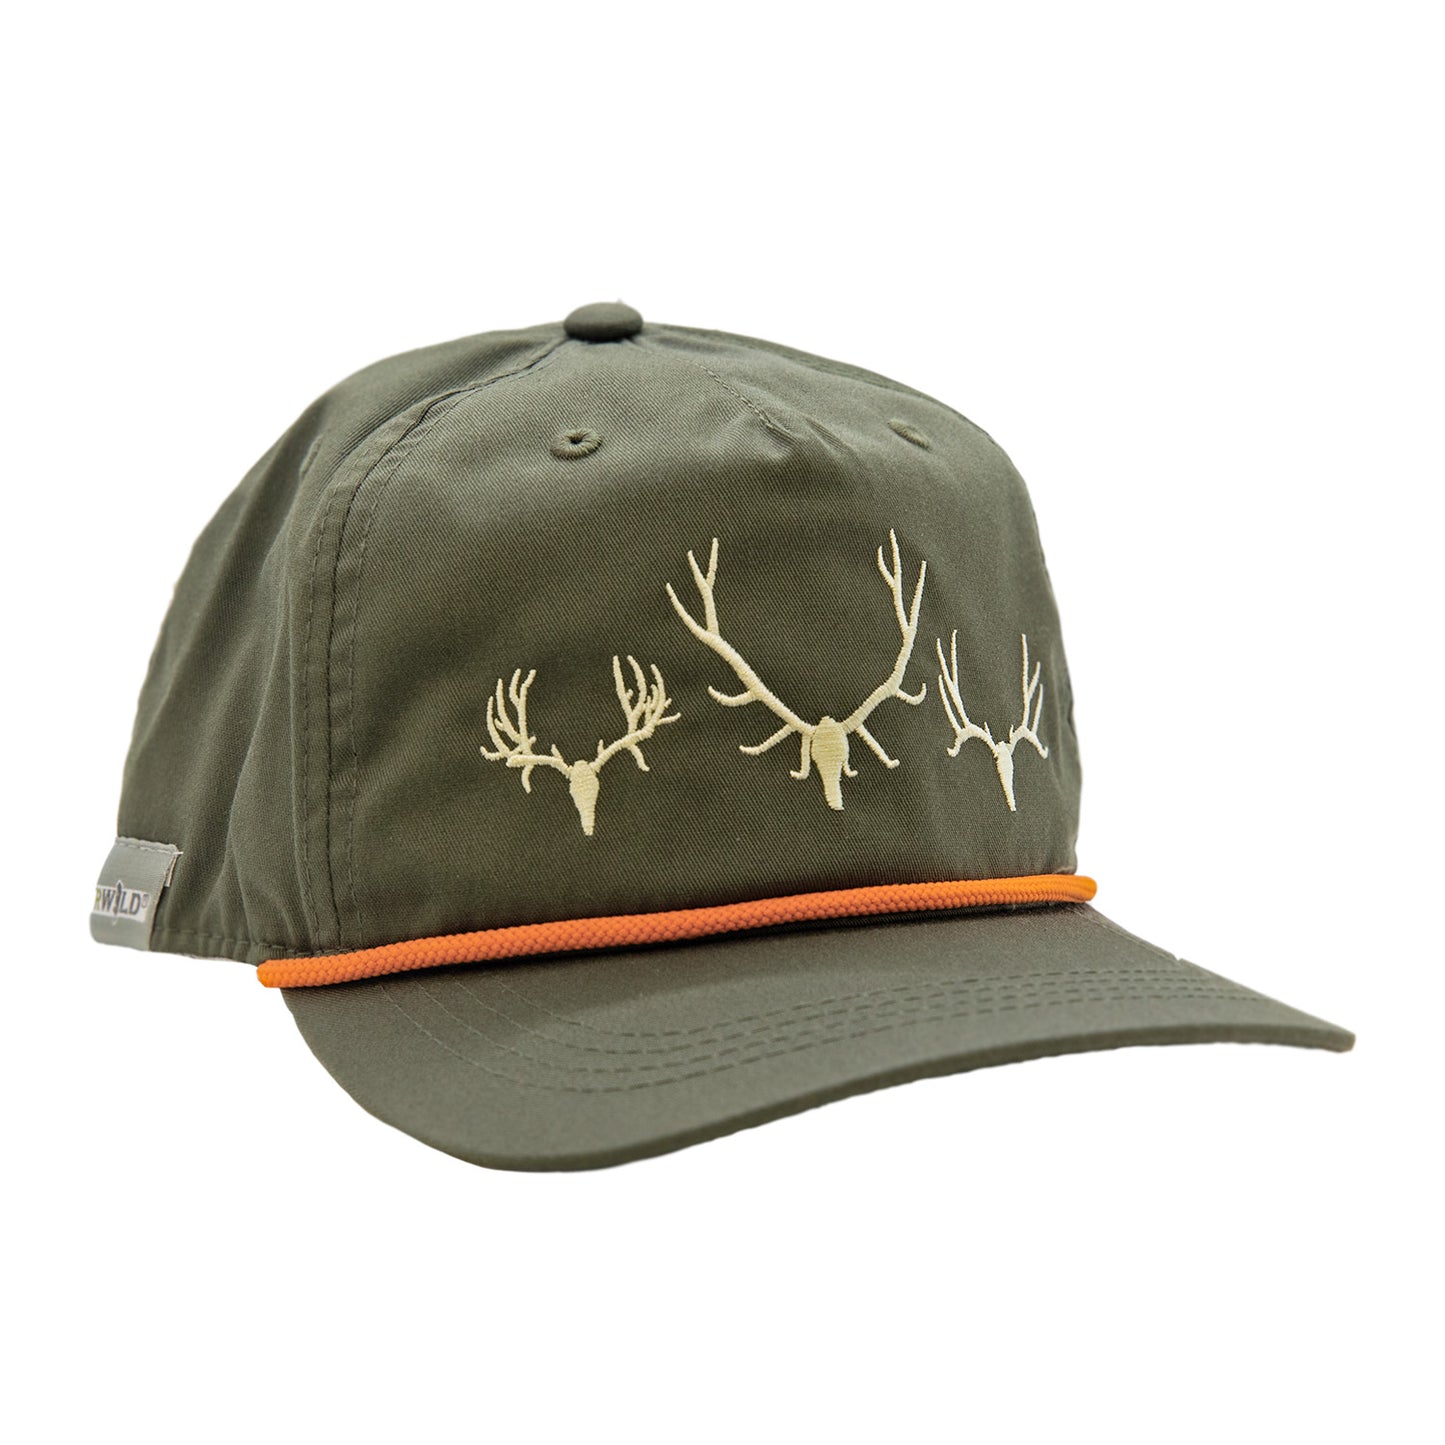 Green Full cloth hat with orange rope. on the front shows the skulls of an elk, mule deer and whitetail deer in off white